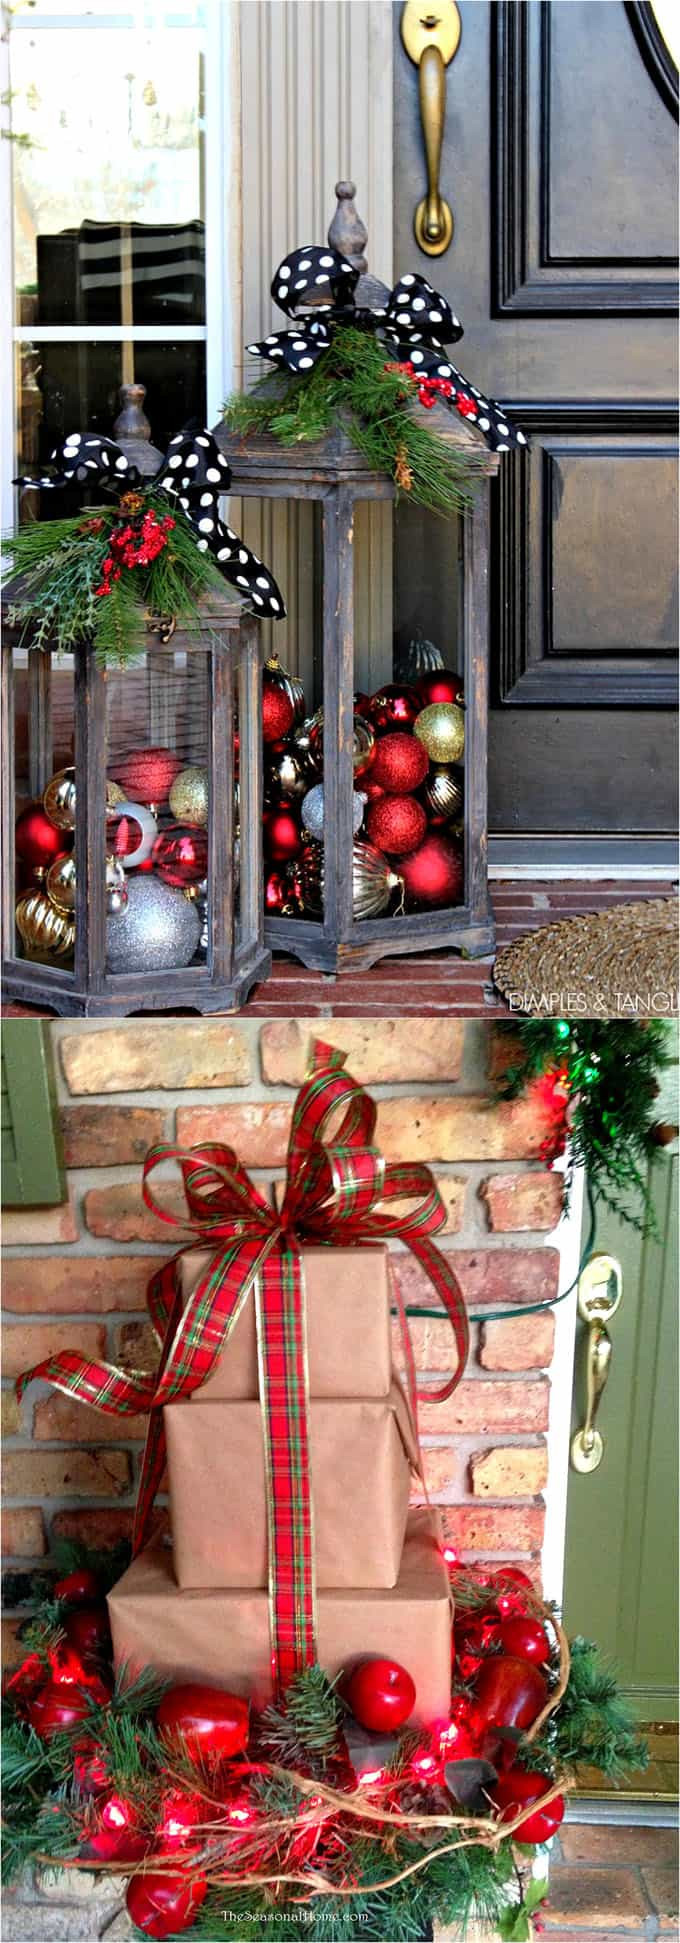 DIY Christmas Decorations Outdoor
 Gorgeous Outdoor Christmas Decorations 32 Best Ideas